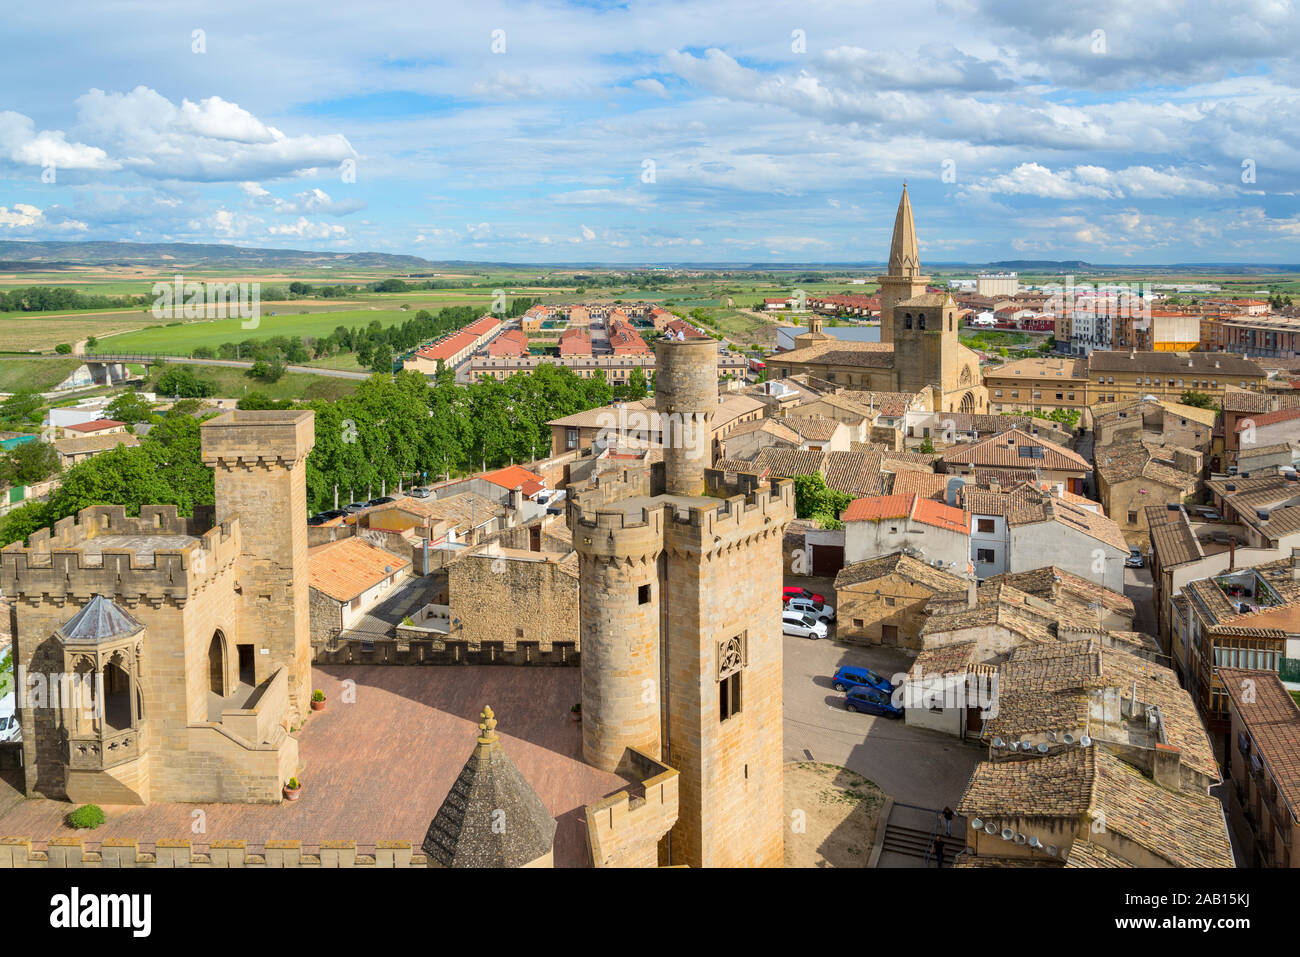 Spanish town Olite with a castle and a cathedral, view from above Stock Photo